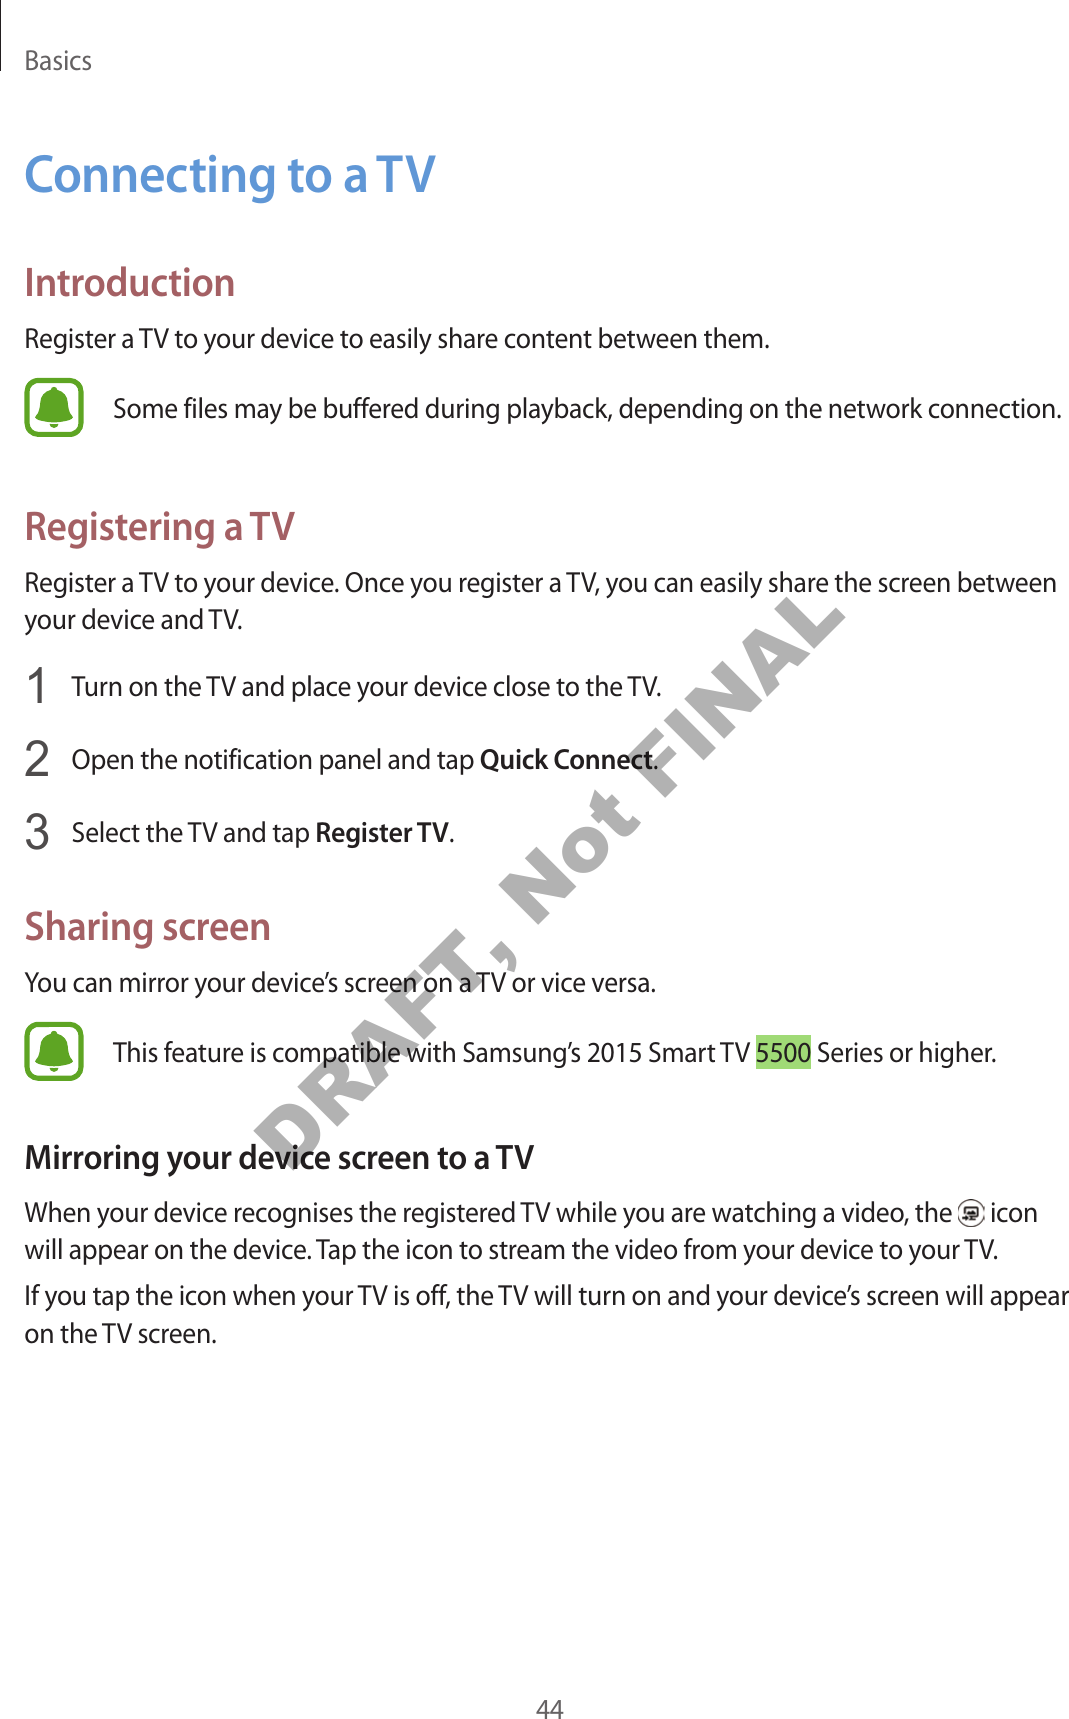 Basics44C onnecting to a TVIntroductionRegister a TV to your device t o easily shar e c ont ent between them.Some files may be buffer ed during pla yback, depending on the network connection.Registering a TVRegister a TV to your device. Once you reg ister a TV, you can easily shar e the scr een between your device and TV.1  Turn on the TV and place your device close to the TV.2  Open the notification panel and tap Quick Connect.3  Select the TV and tap Register TV.Sharing screenYou can mirror your device’s screen on a TV or vice versa.This f eatur e is c ompatible with Samsung’s 2015 Smart TV 5500 Series or higher.Mirroring your de vic e screen t o a TVWhen your devic e r ecog nises the r eg ister ed TV while you are wat ching a video, the   icon will appear on the device . Tap the icon to stream the video from y our devic e t o y our TV.If you tap the icon when your TV is off , the TV will turn on and your devic e’s screen will appear on the TV screen.DRAFT, Not FINAL